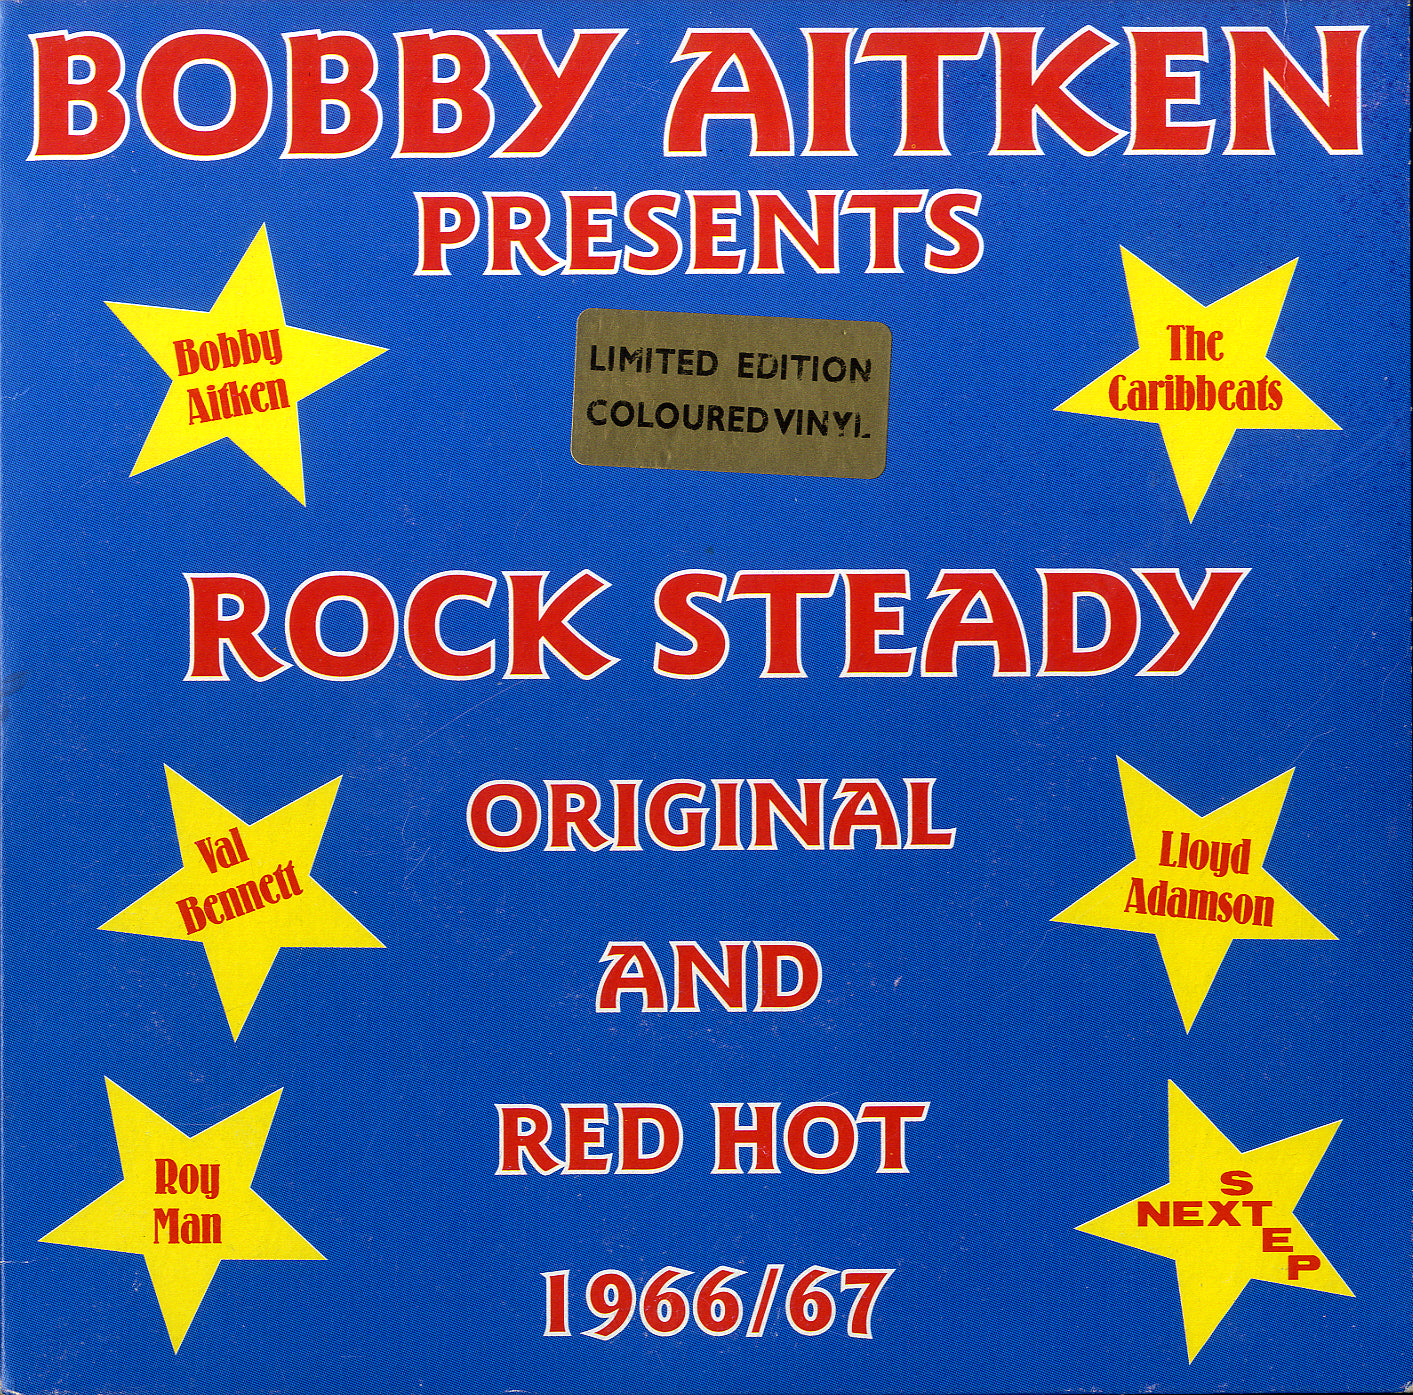 V.A. [Bobby Aitken Presents Rock Steady, Original And Red Hot 1966/67]